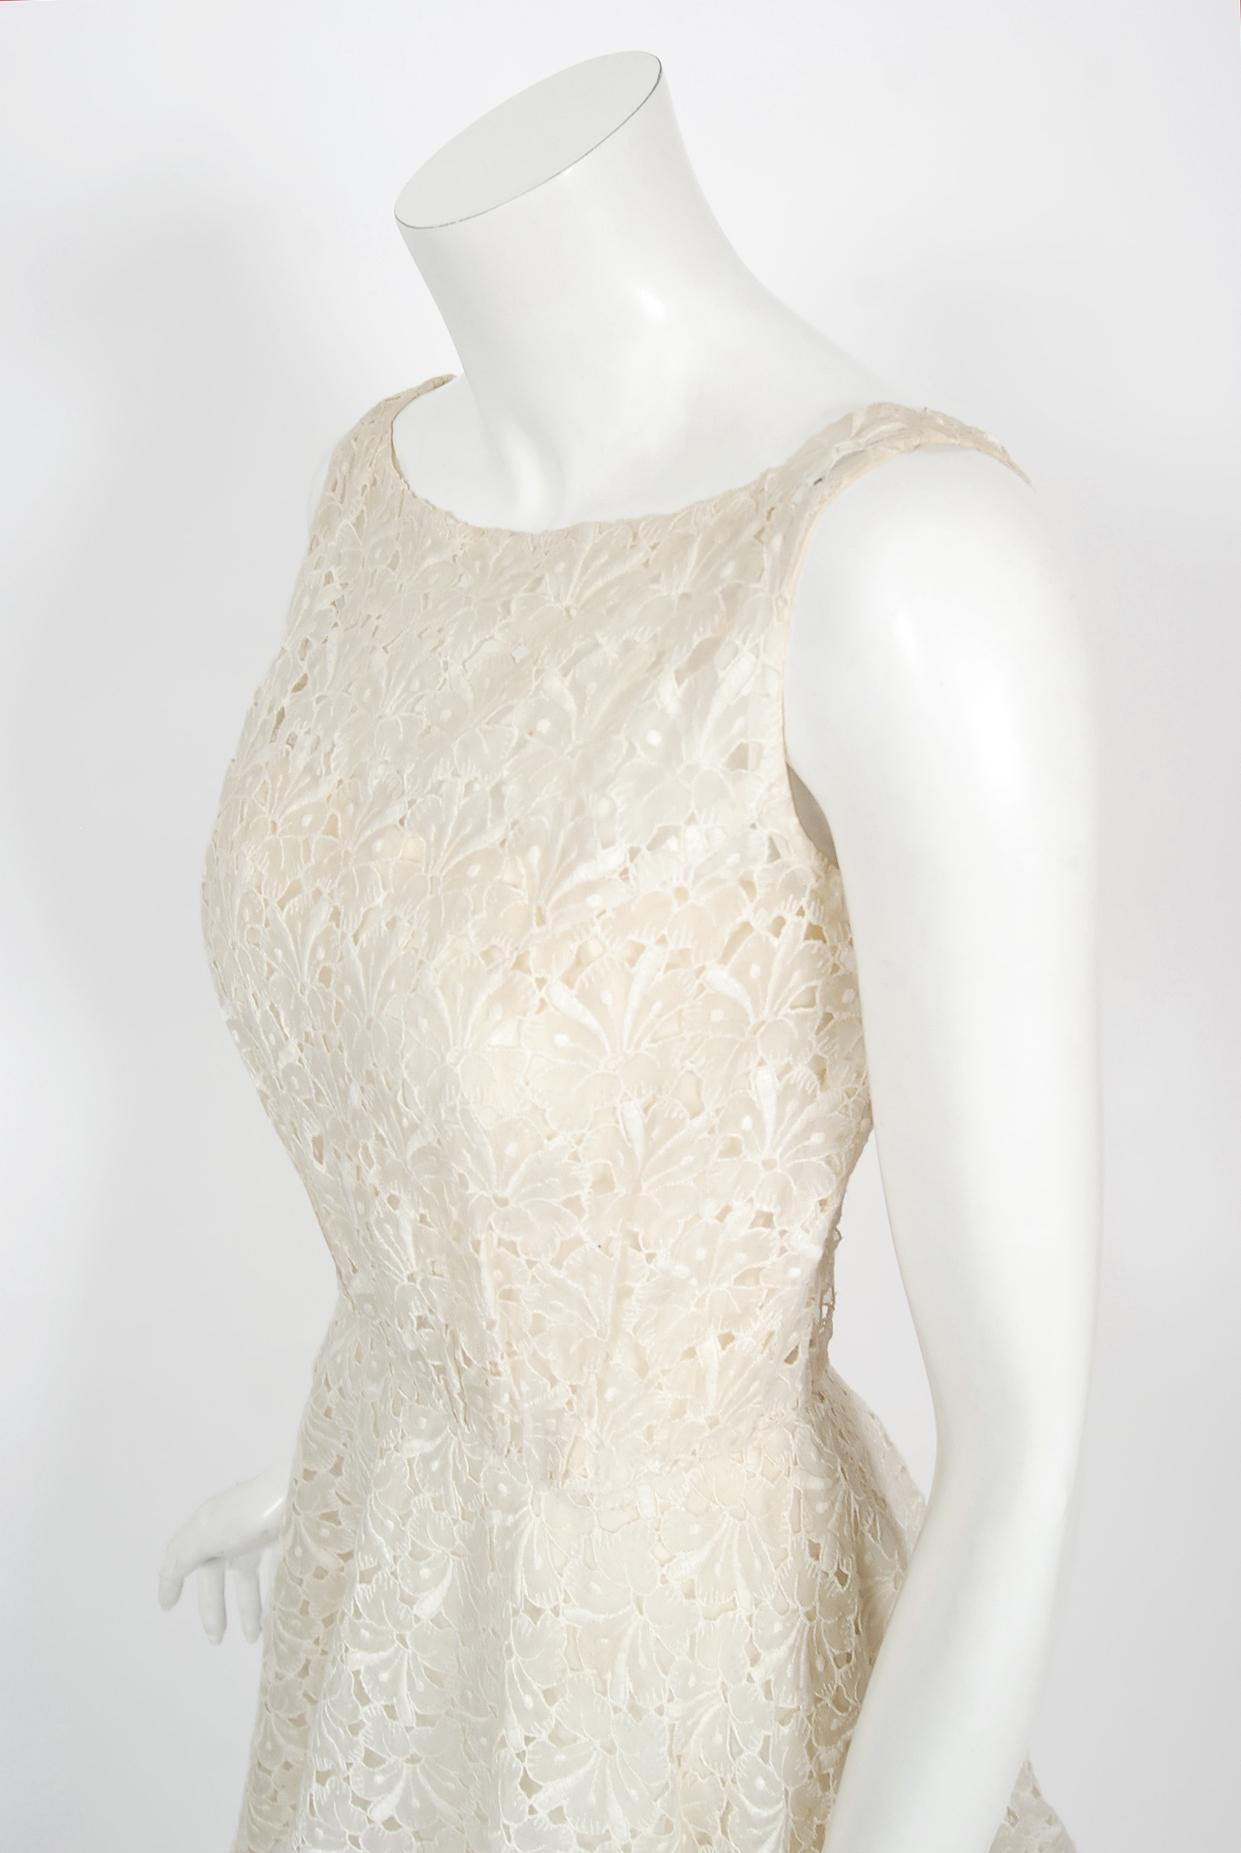 Beige Vintage 1950's Ceil Chapman Ivory Embroidered Eyelet Cotton Tiered Bridal Dress For Sale